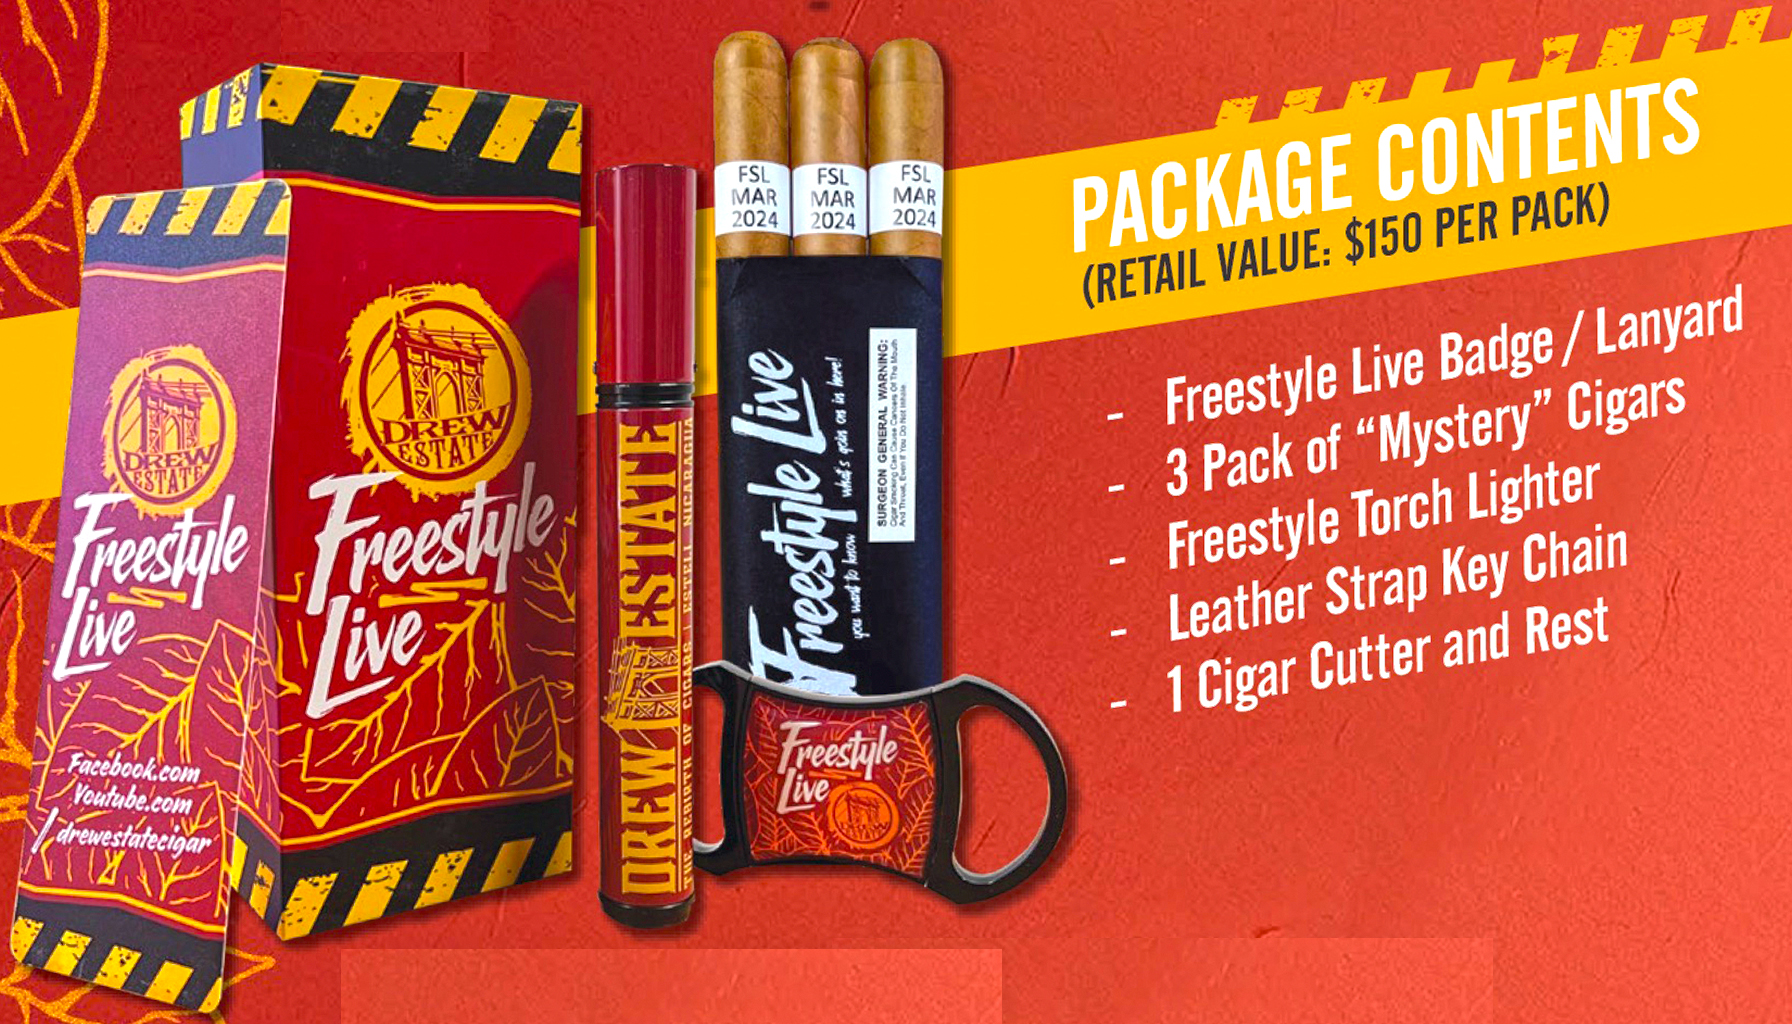 A selection of premium cigars and exclusive accessories in the Drew Estate Freestyle Live Pack